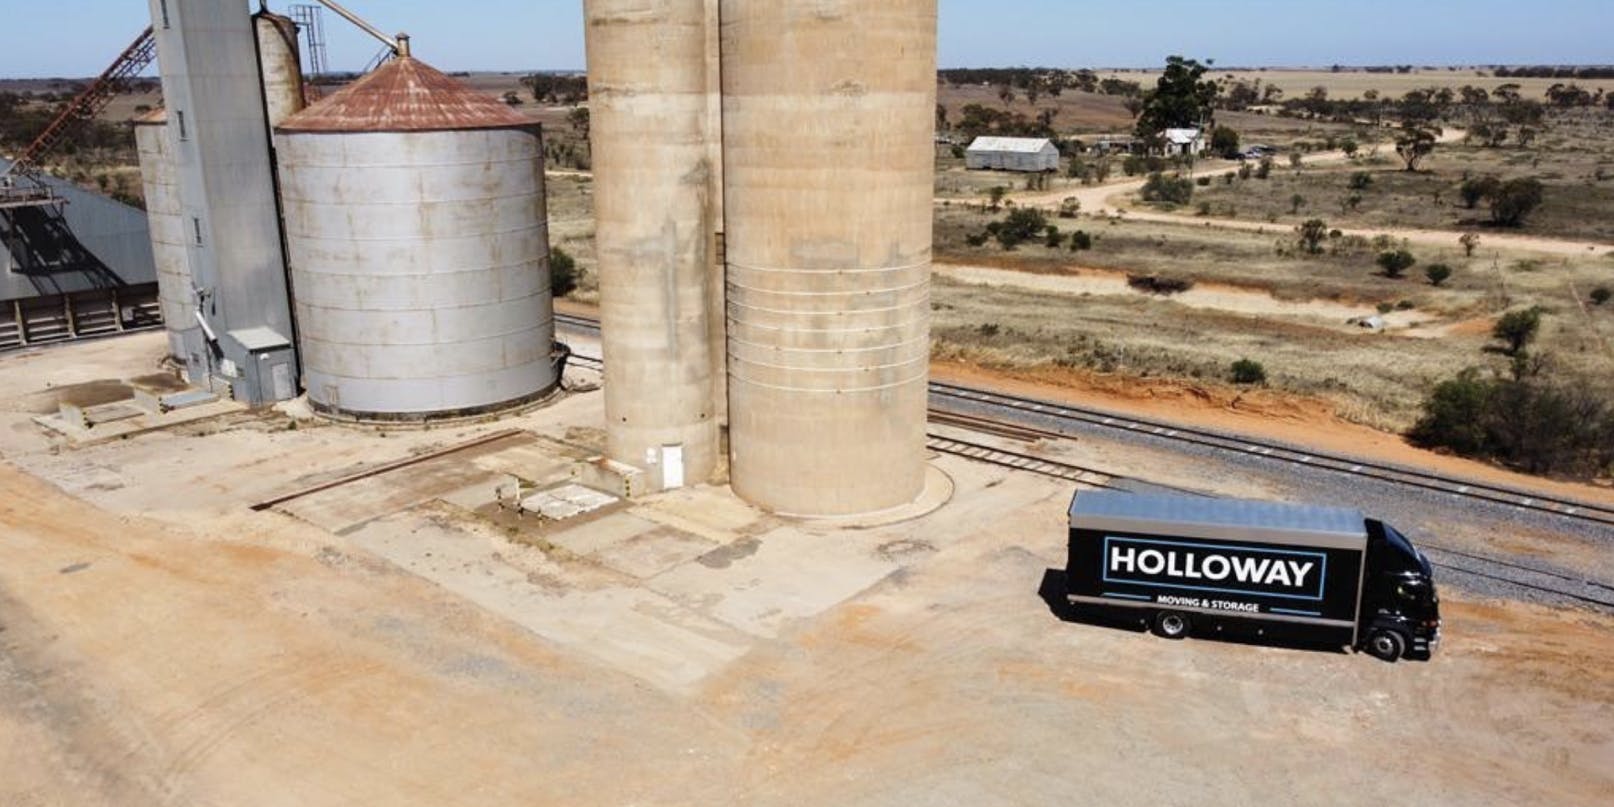 Holloway truck parked next to a silo